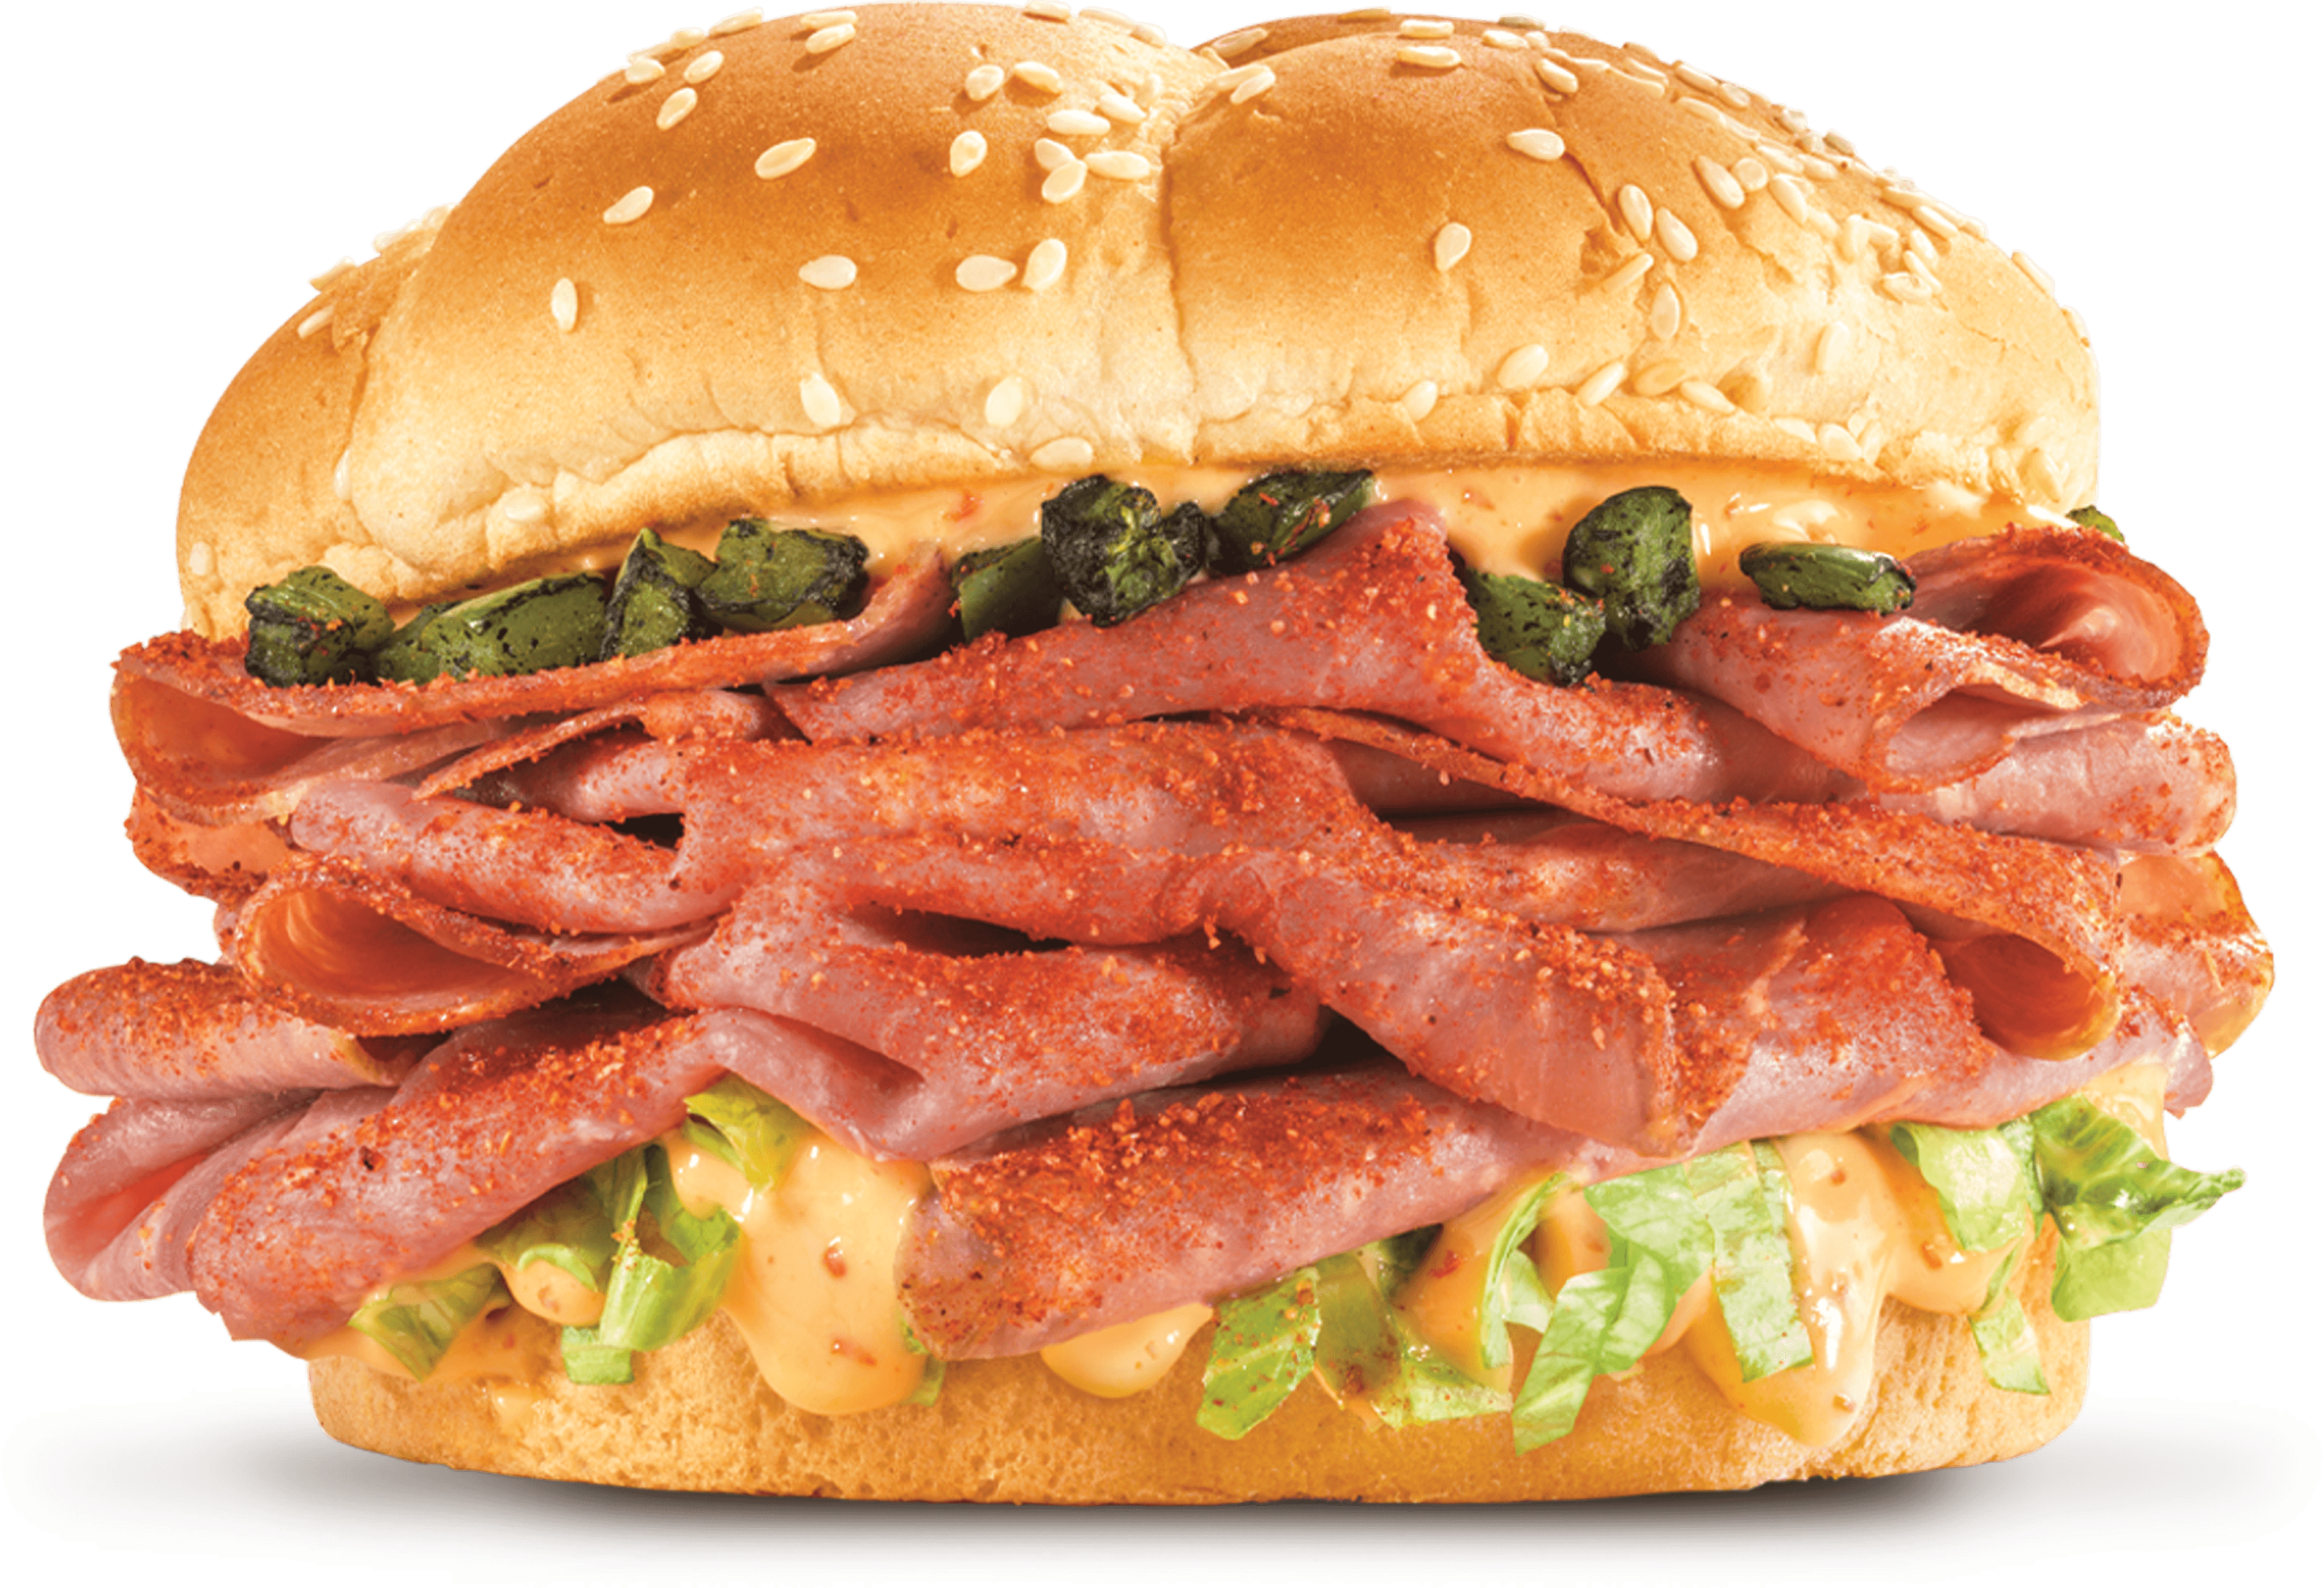 Arby's Spicy Roast Beef Sandwich Nutrition Facts